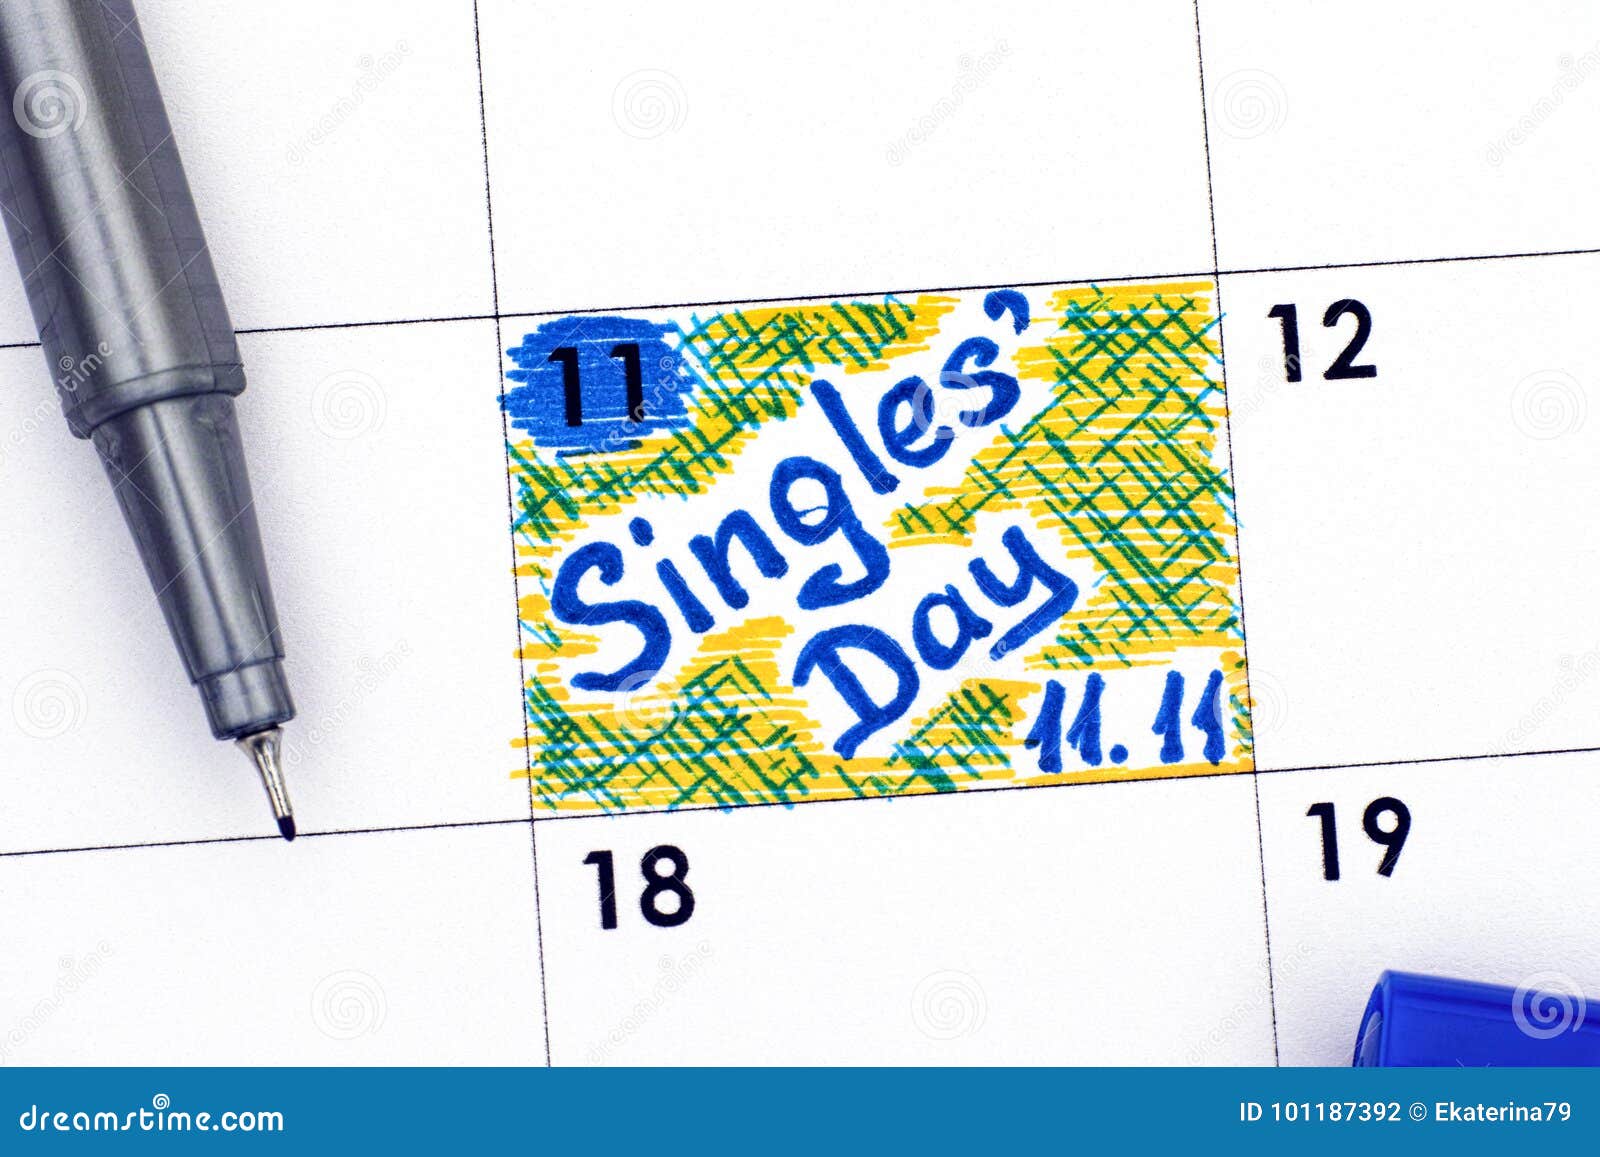 reminder singles day 11.11 in calendar with blue pen